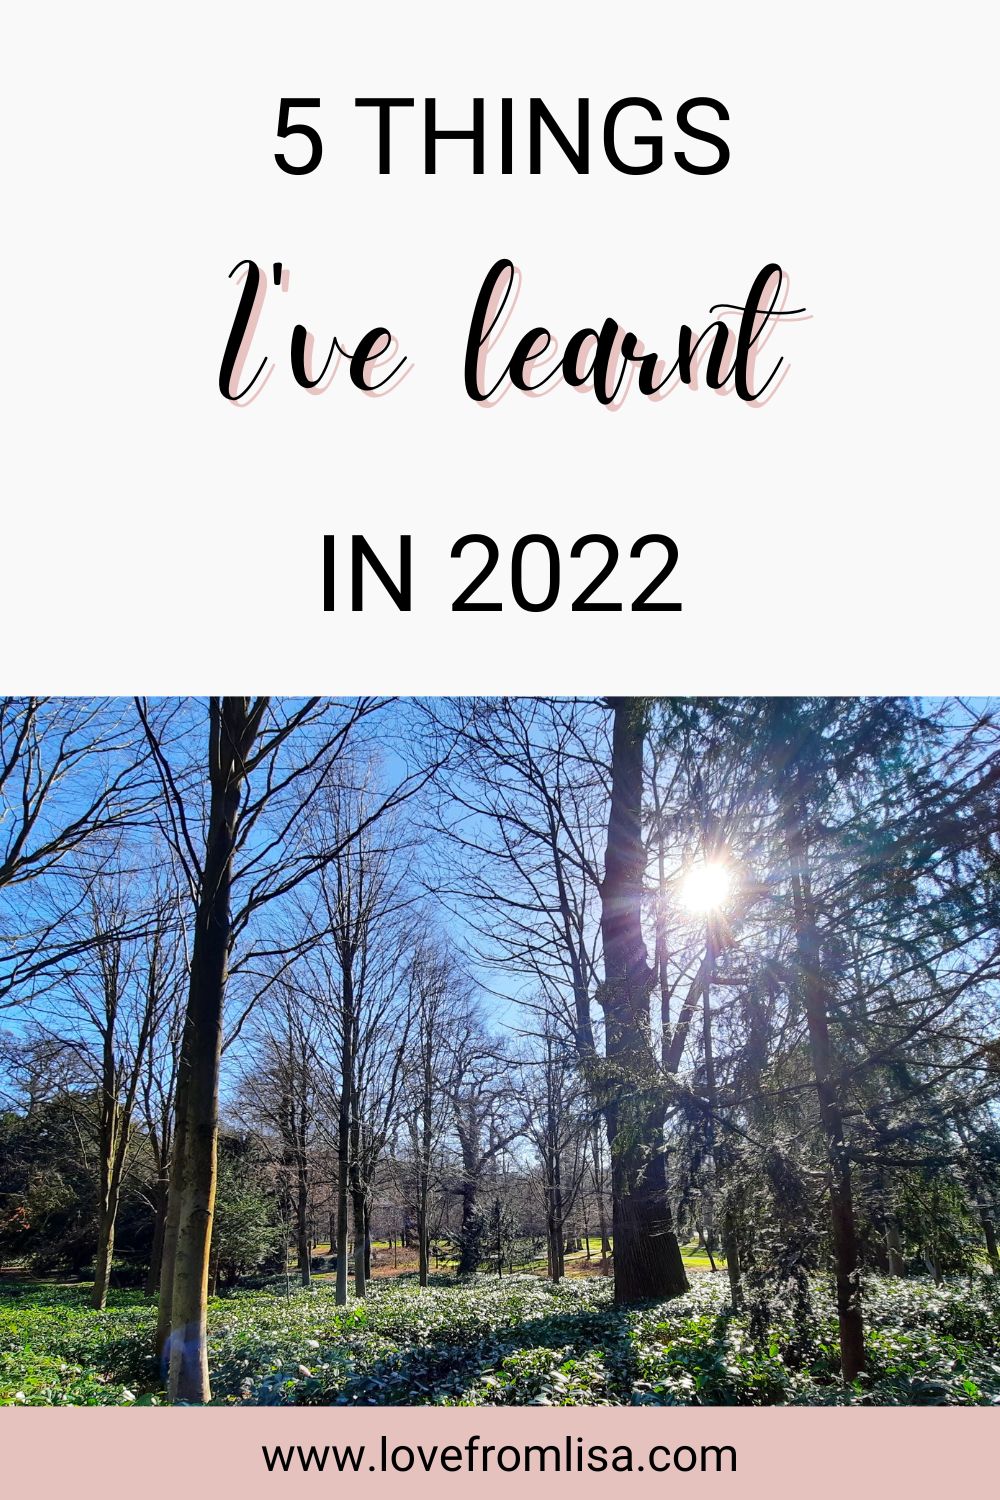 5 things I learnt in 2022, which include lessons on school mum friendships, making time for self-care, and getting better at time management and goal setting.